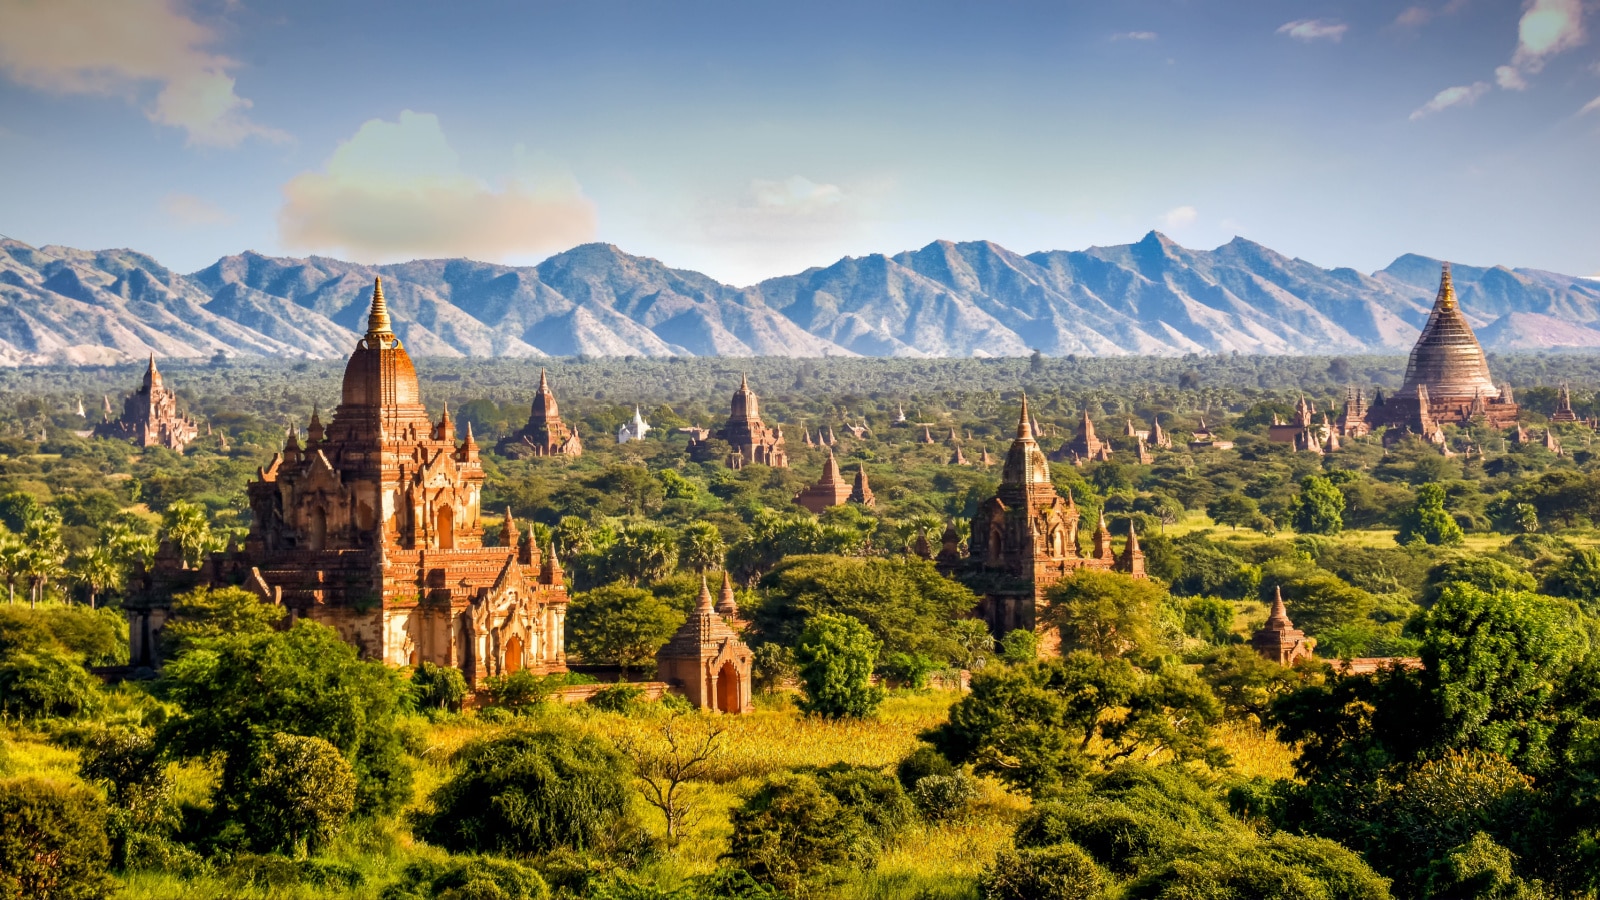 <p>Bagan archaeological zones are "unreal," someone on the thread exclaims, comparing it to the biblical paradise of Eden. The downside? Consider touring with registered tour guides. Bait-and-Switch-Tours can make for an unpleasant experience.</p>